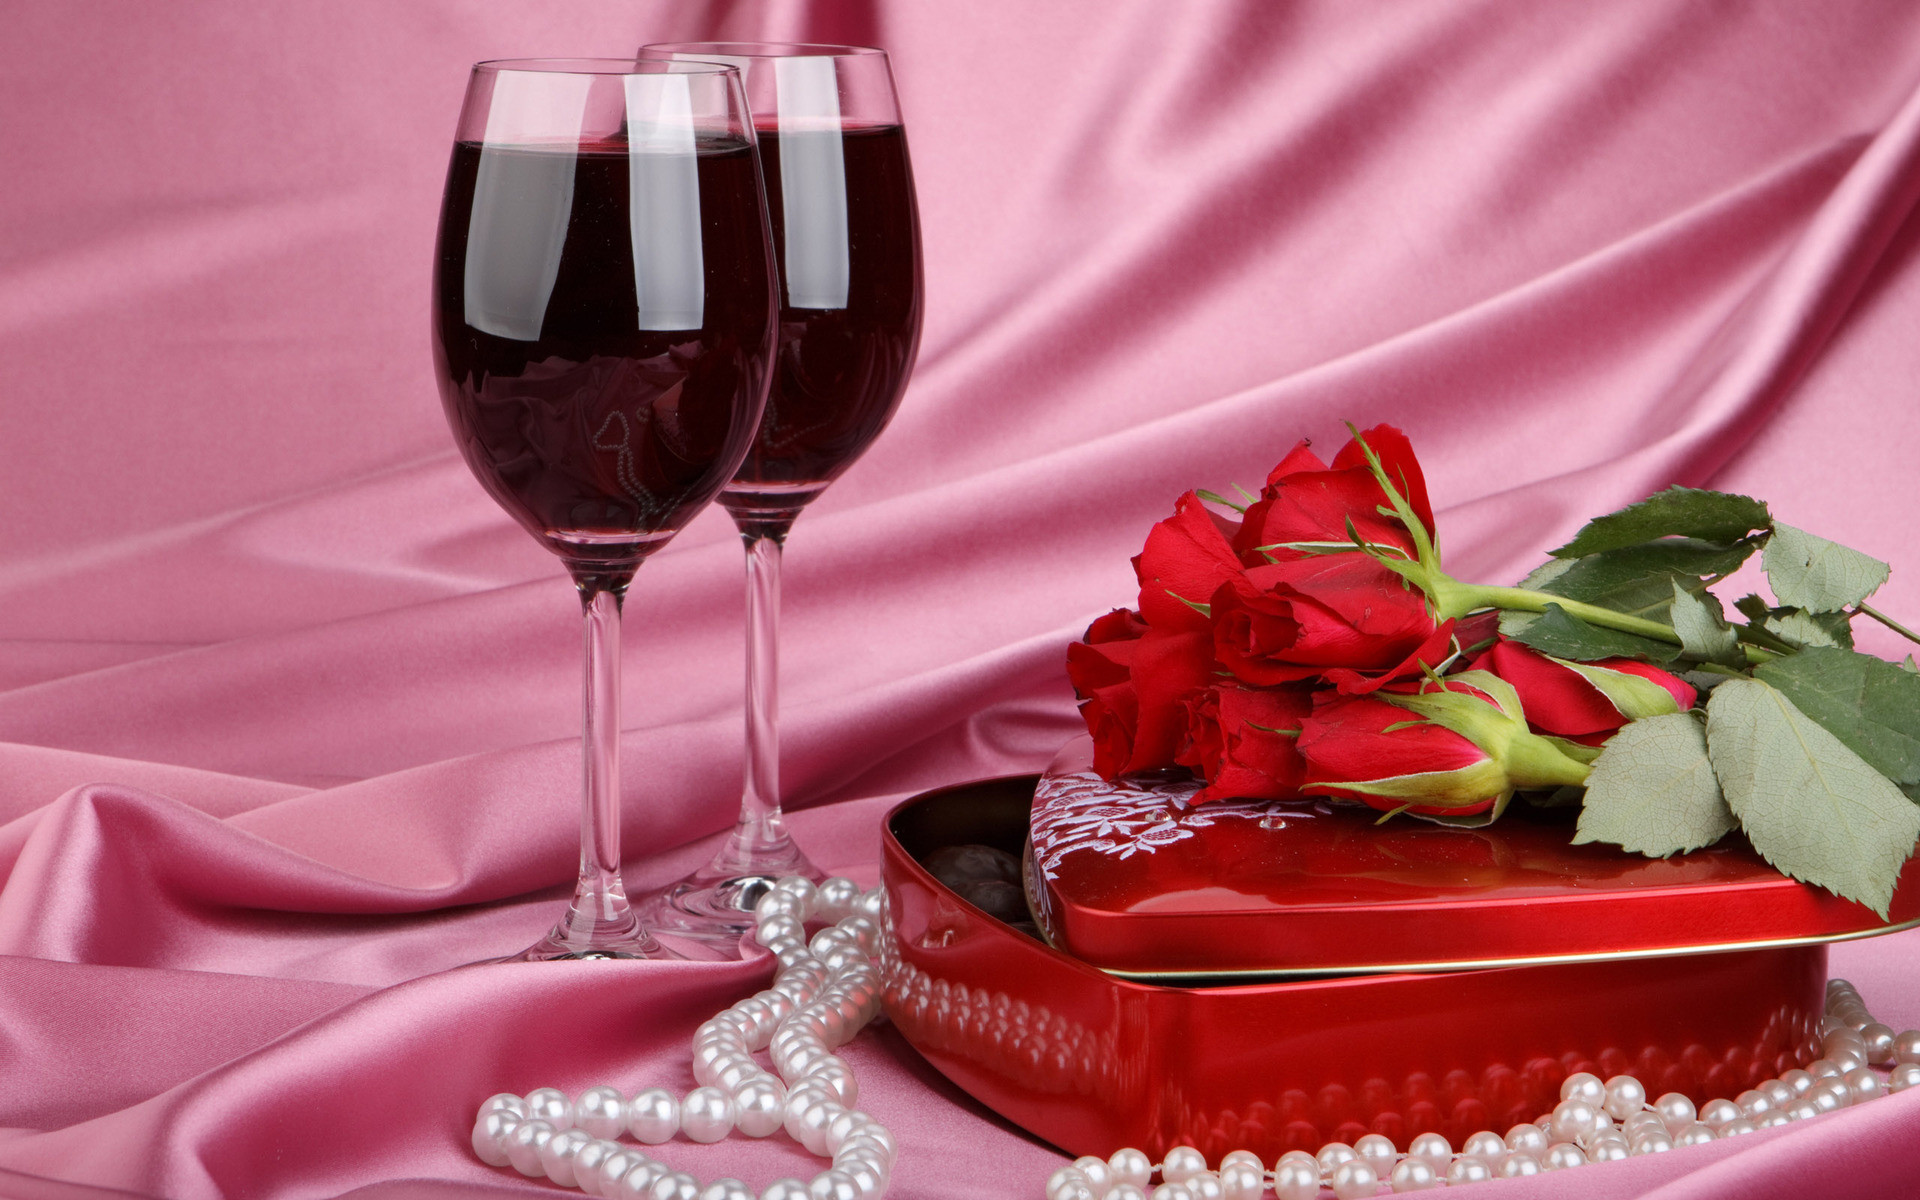 1920x1200 Download wallpaper: red Wine and Roses, download photo, wallpapers for  desktop